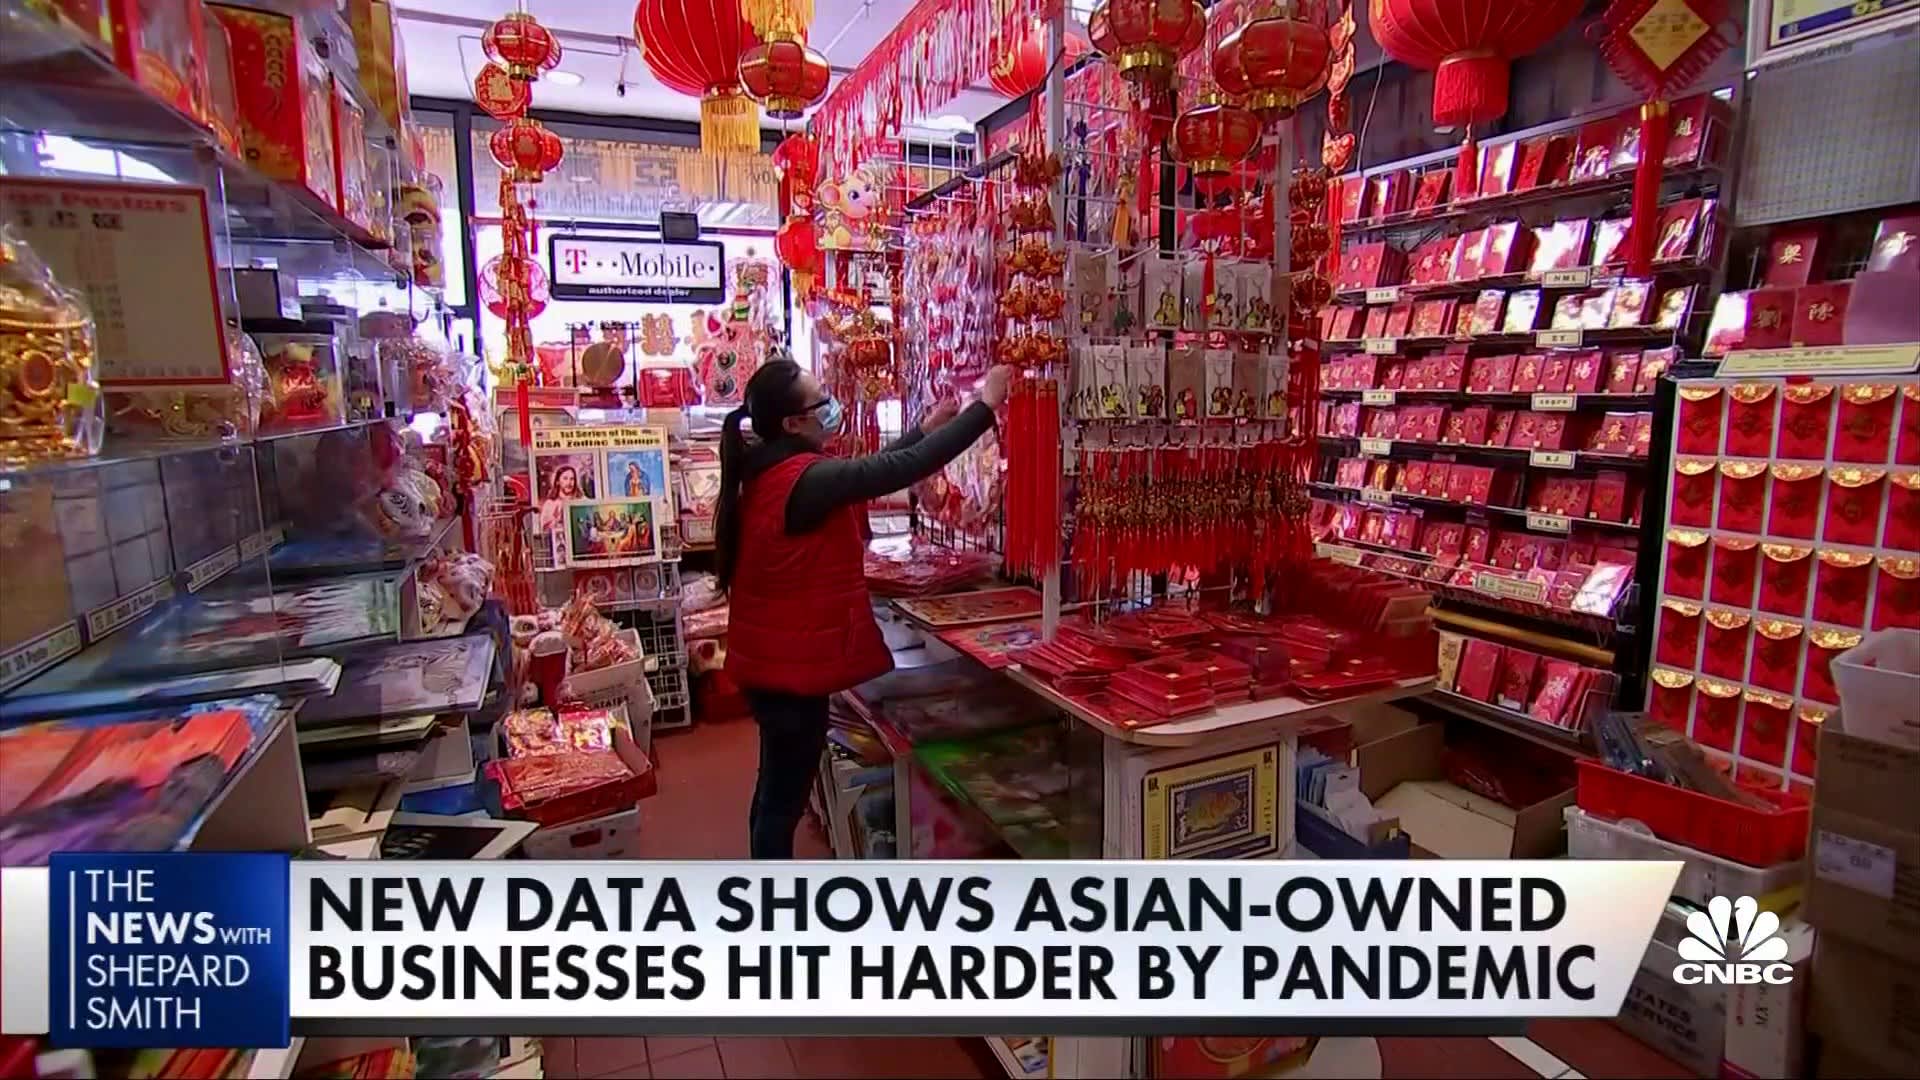 New data shows Asian-owned businesses hit hard by the pandemic